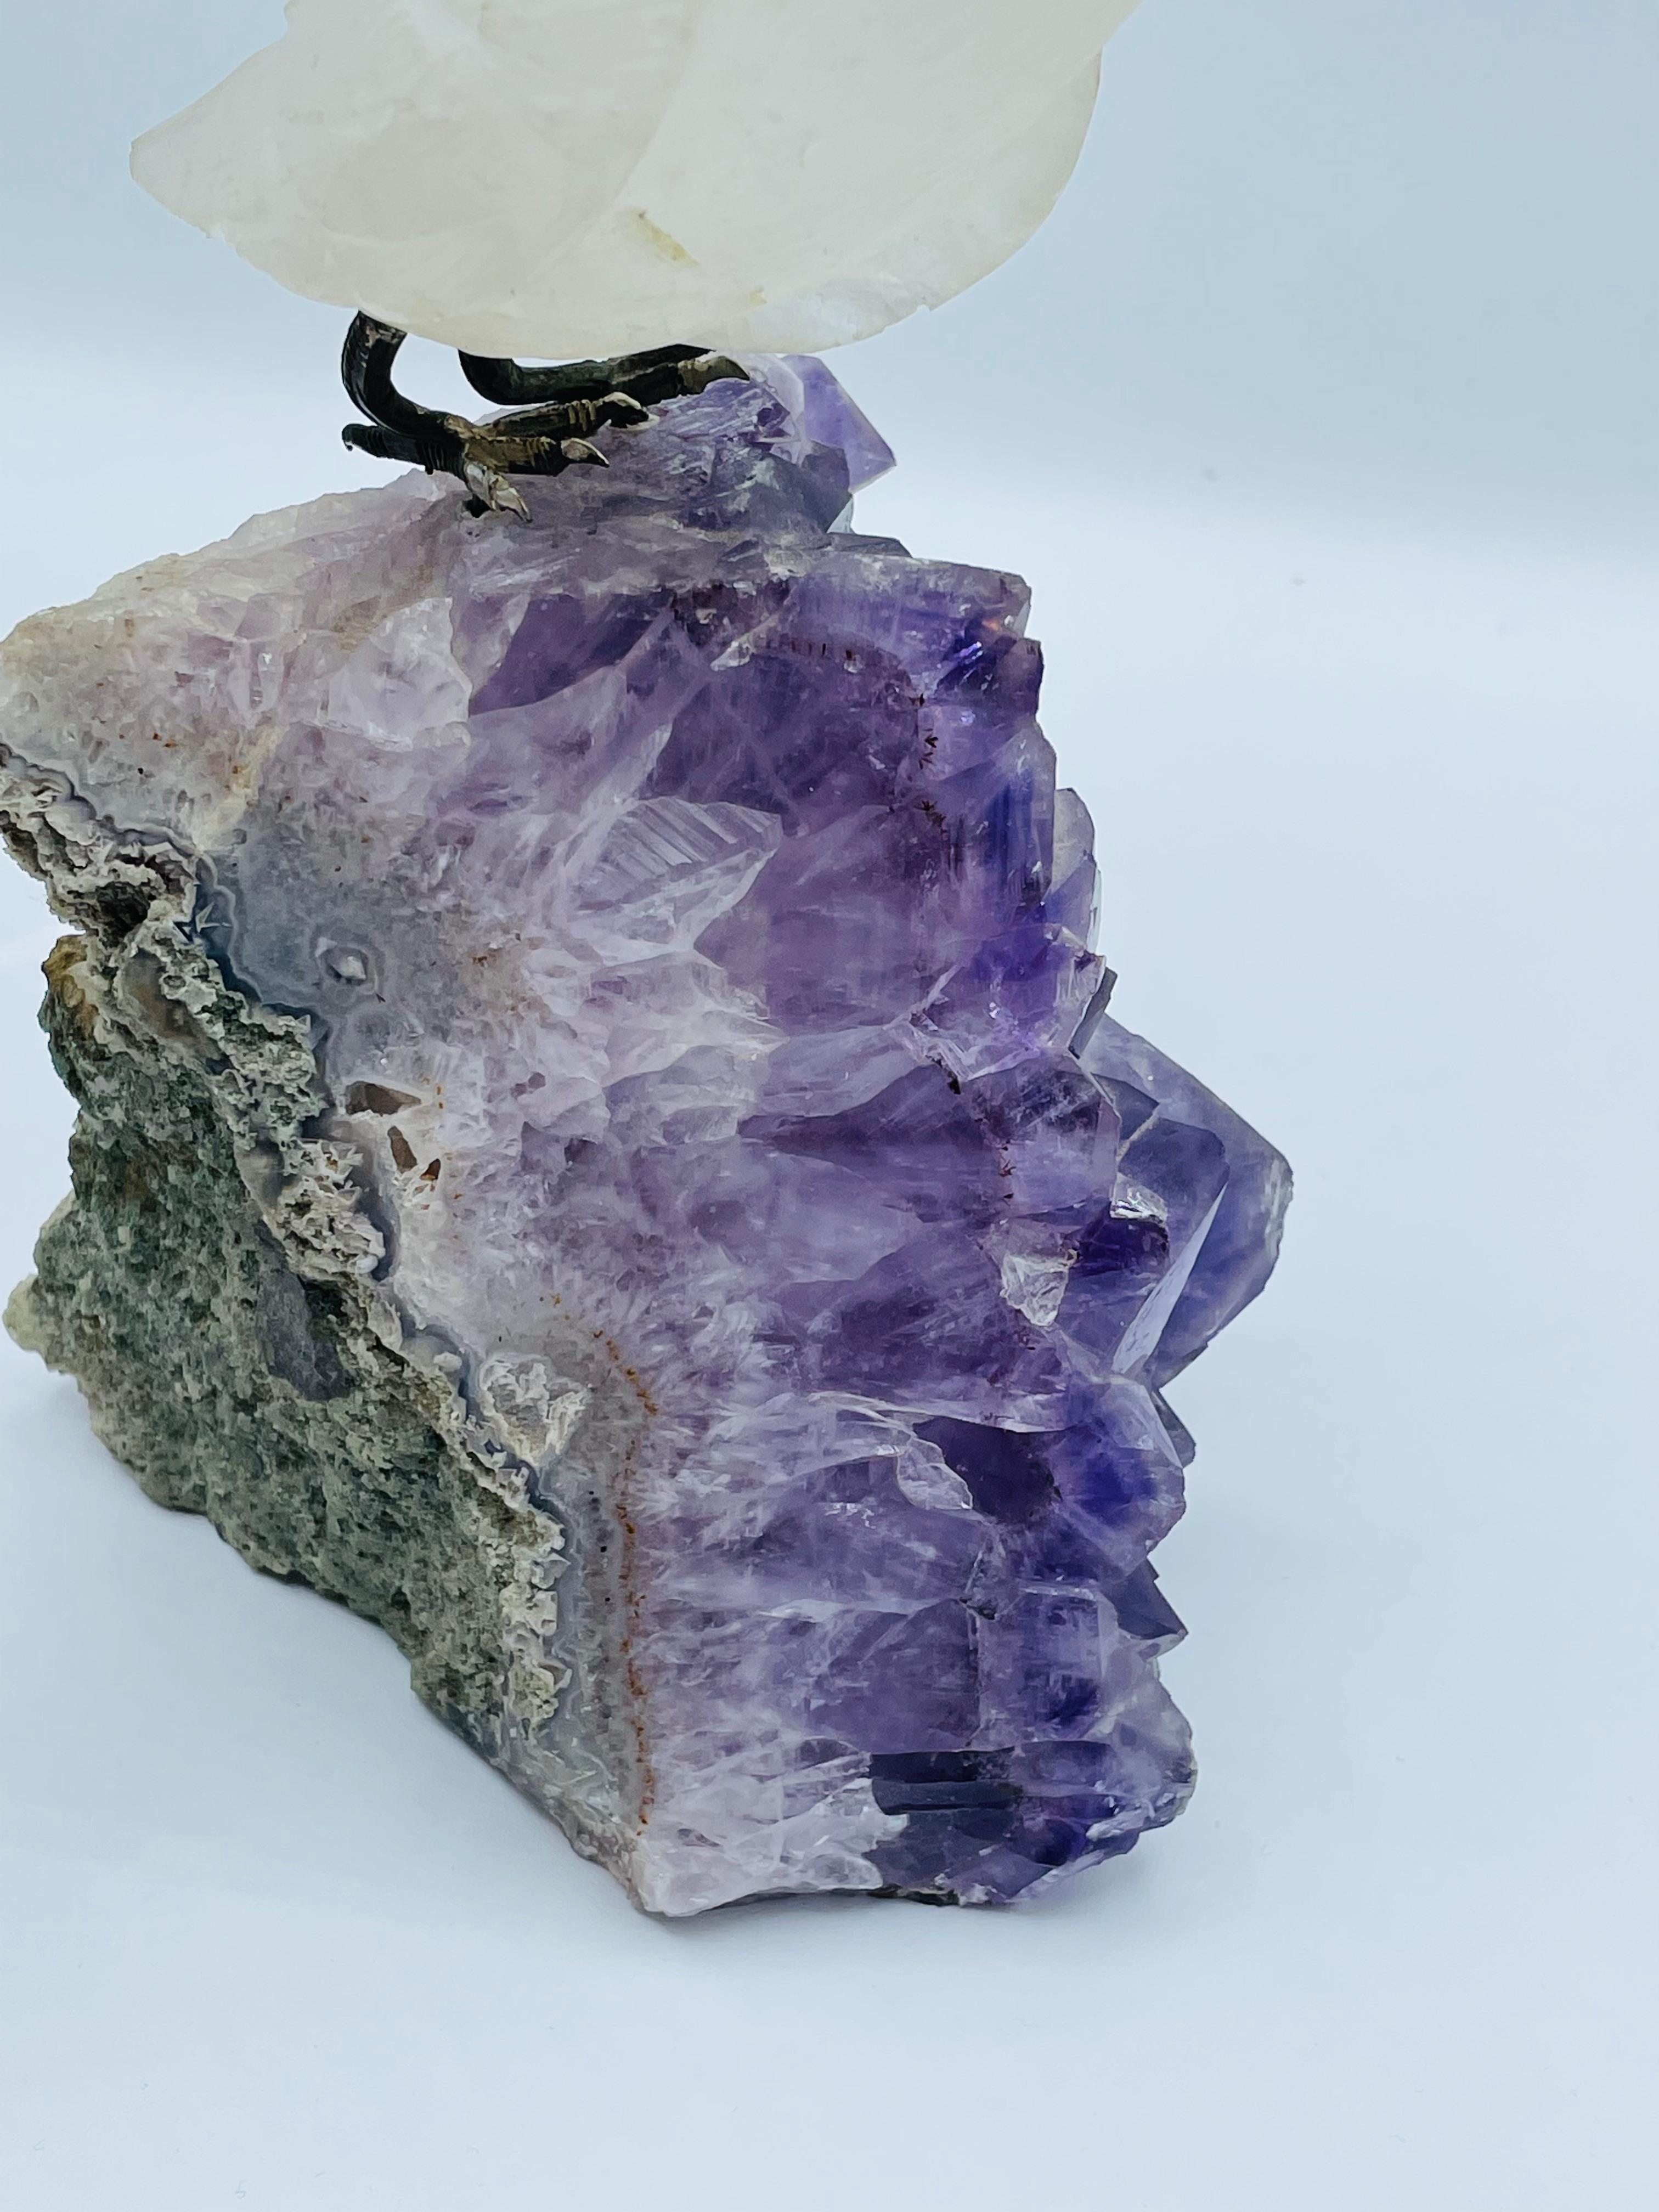 Rock Crystal and Amethyst Geode Sculpture of a Carved Parrot Bird 4